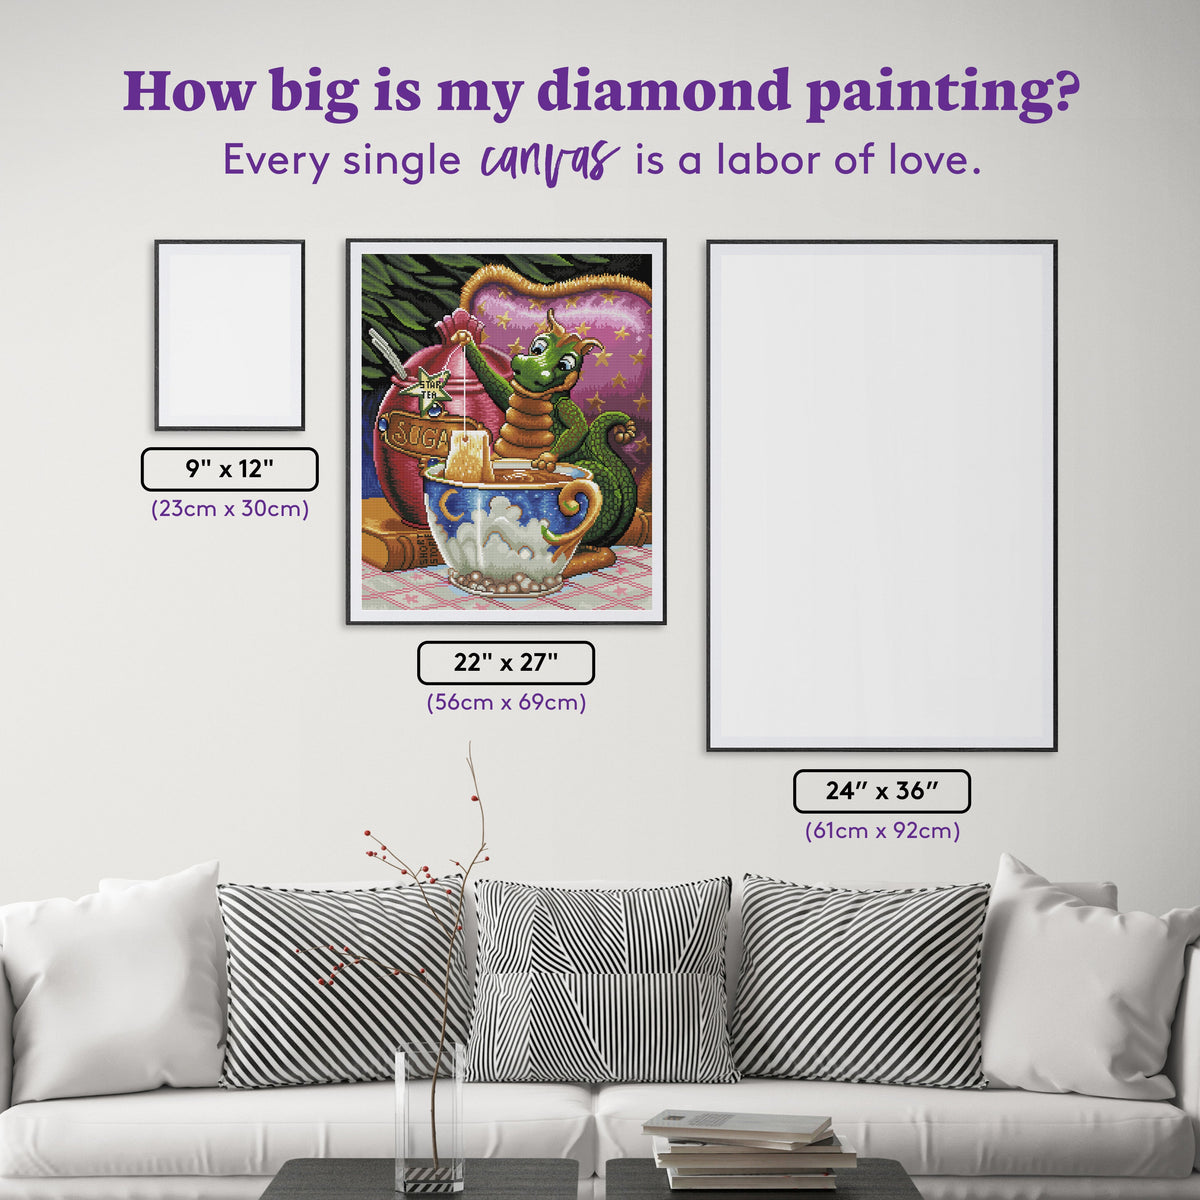 Diamond Painting Afternoon Tea 22" x 27″ (56cm x 69cm) / Round with 50 Colors including 3 ABs / 48,554